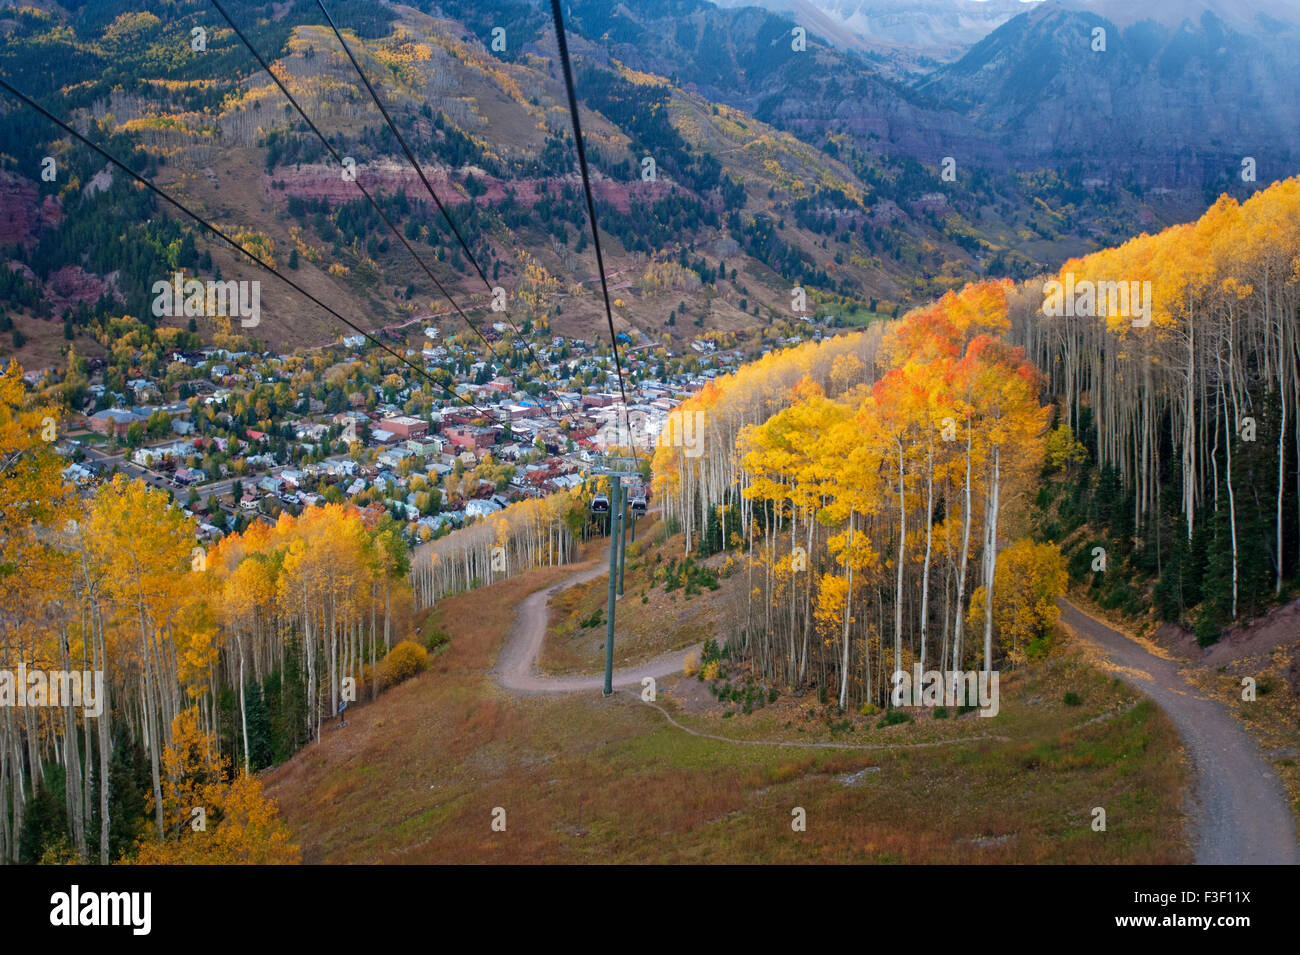 Autumn leaf dispays in Telluride, CO as seen from a gondola Stock Photo